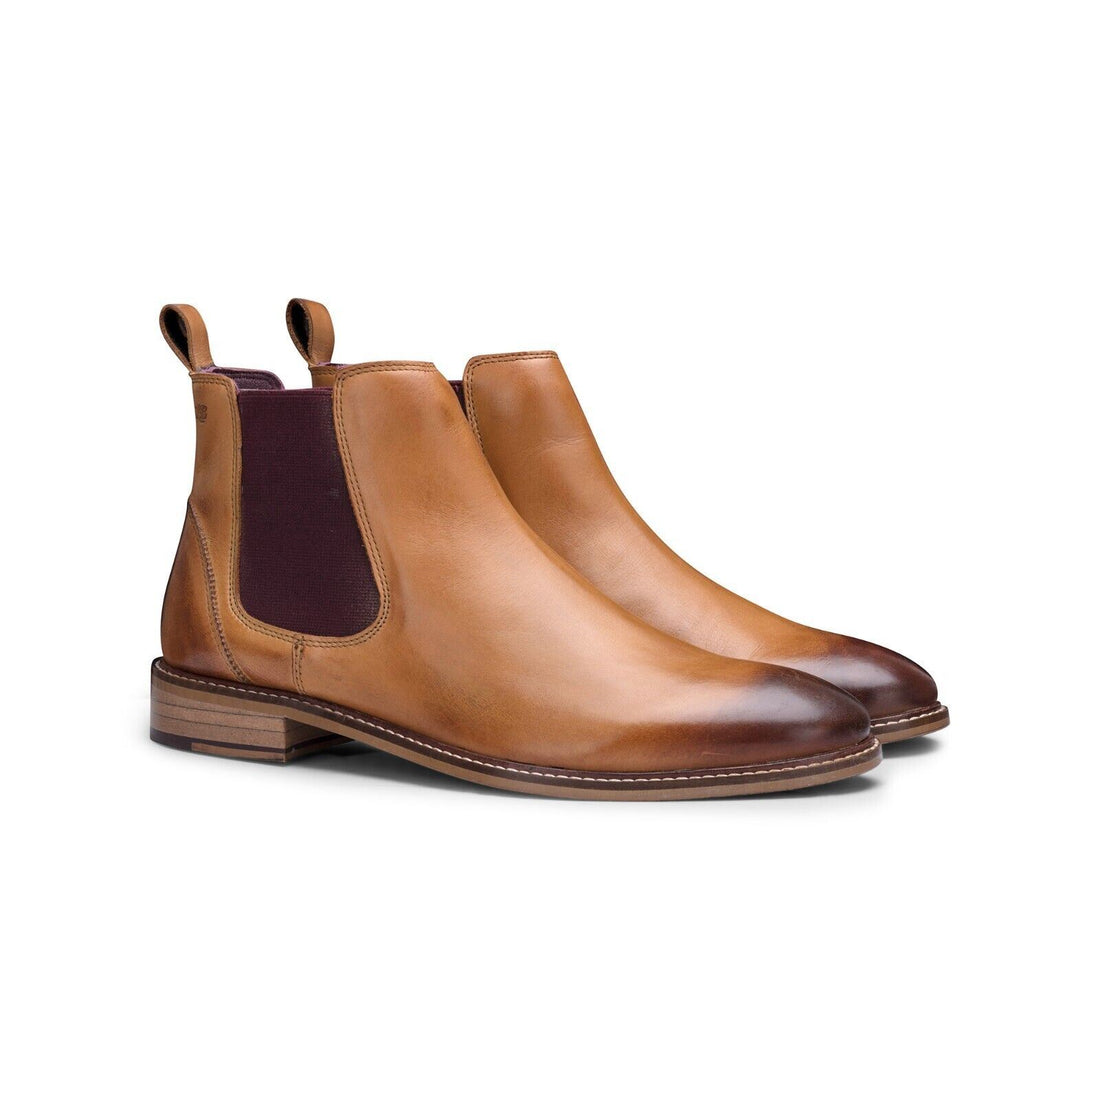 Mens Tan Leather Classic Chelsea Boots - Upperclass Fashions 